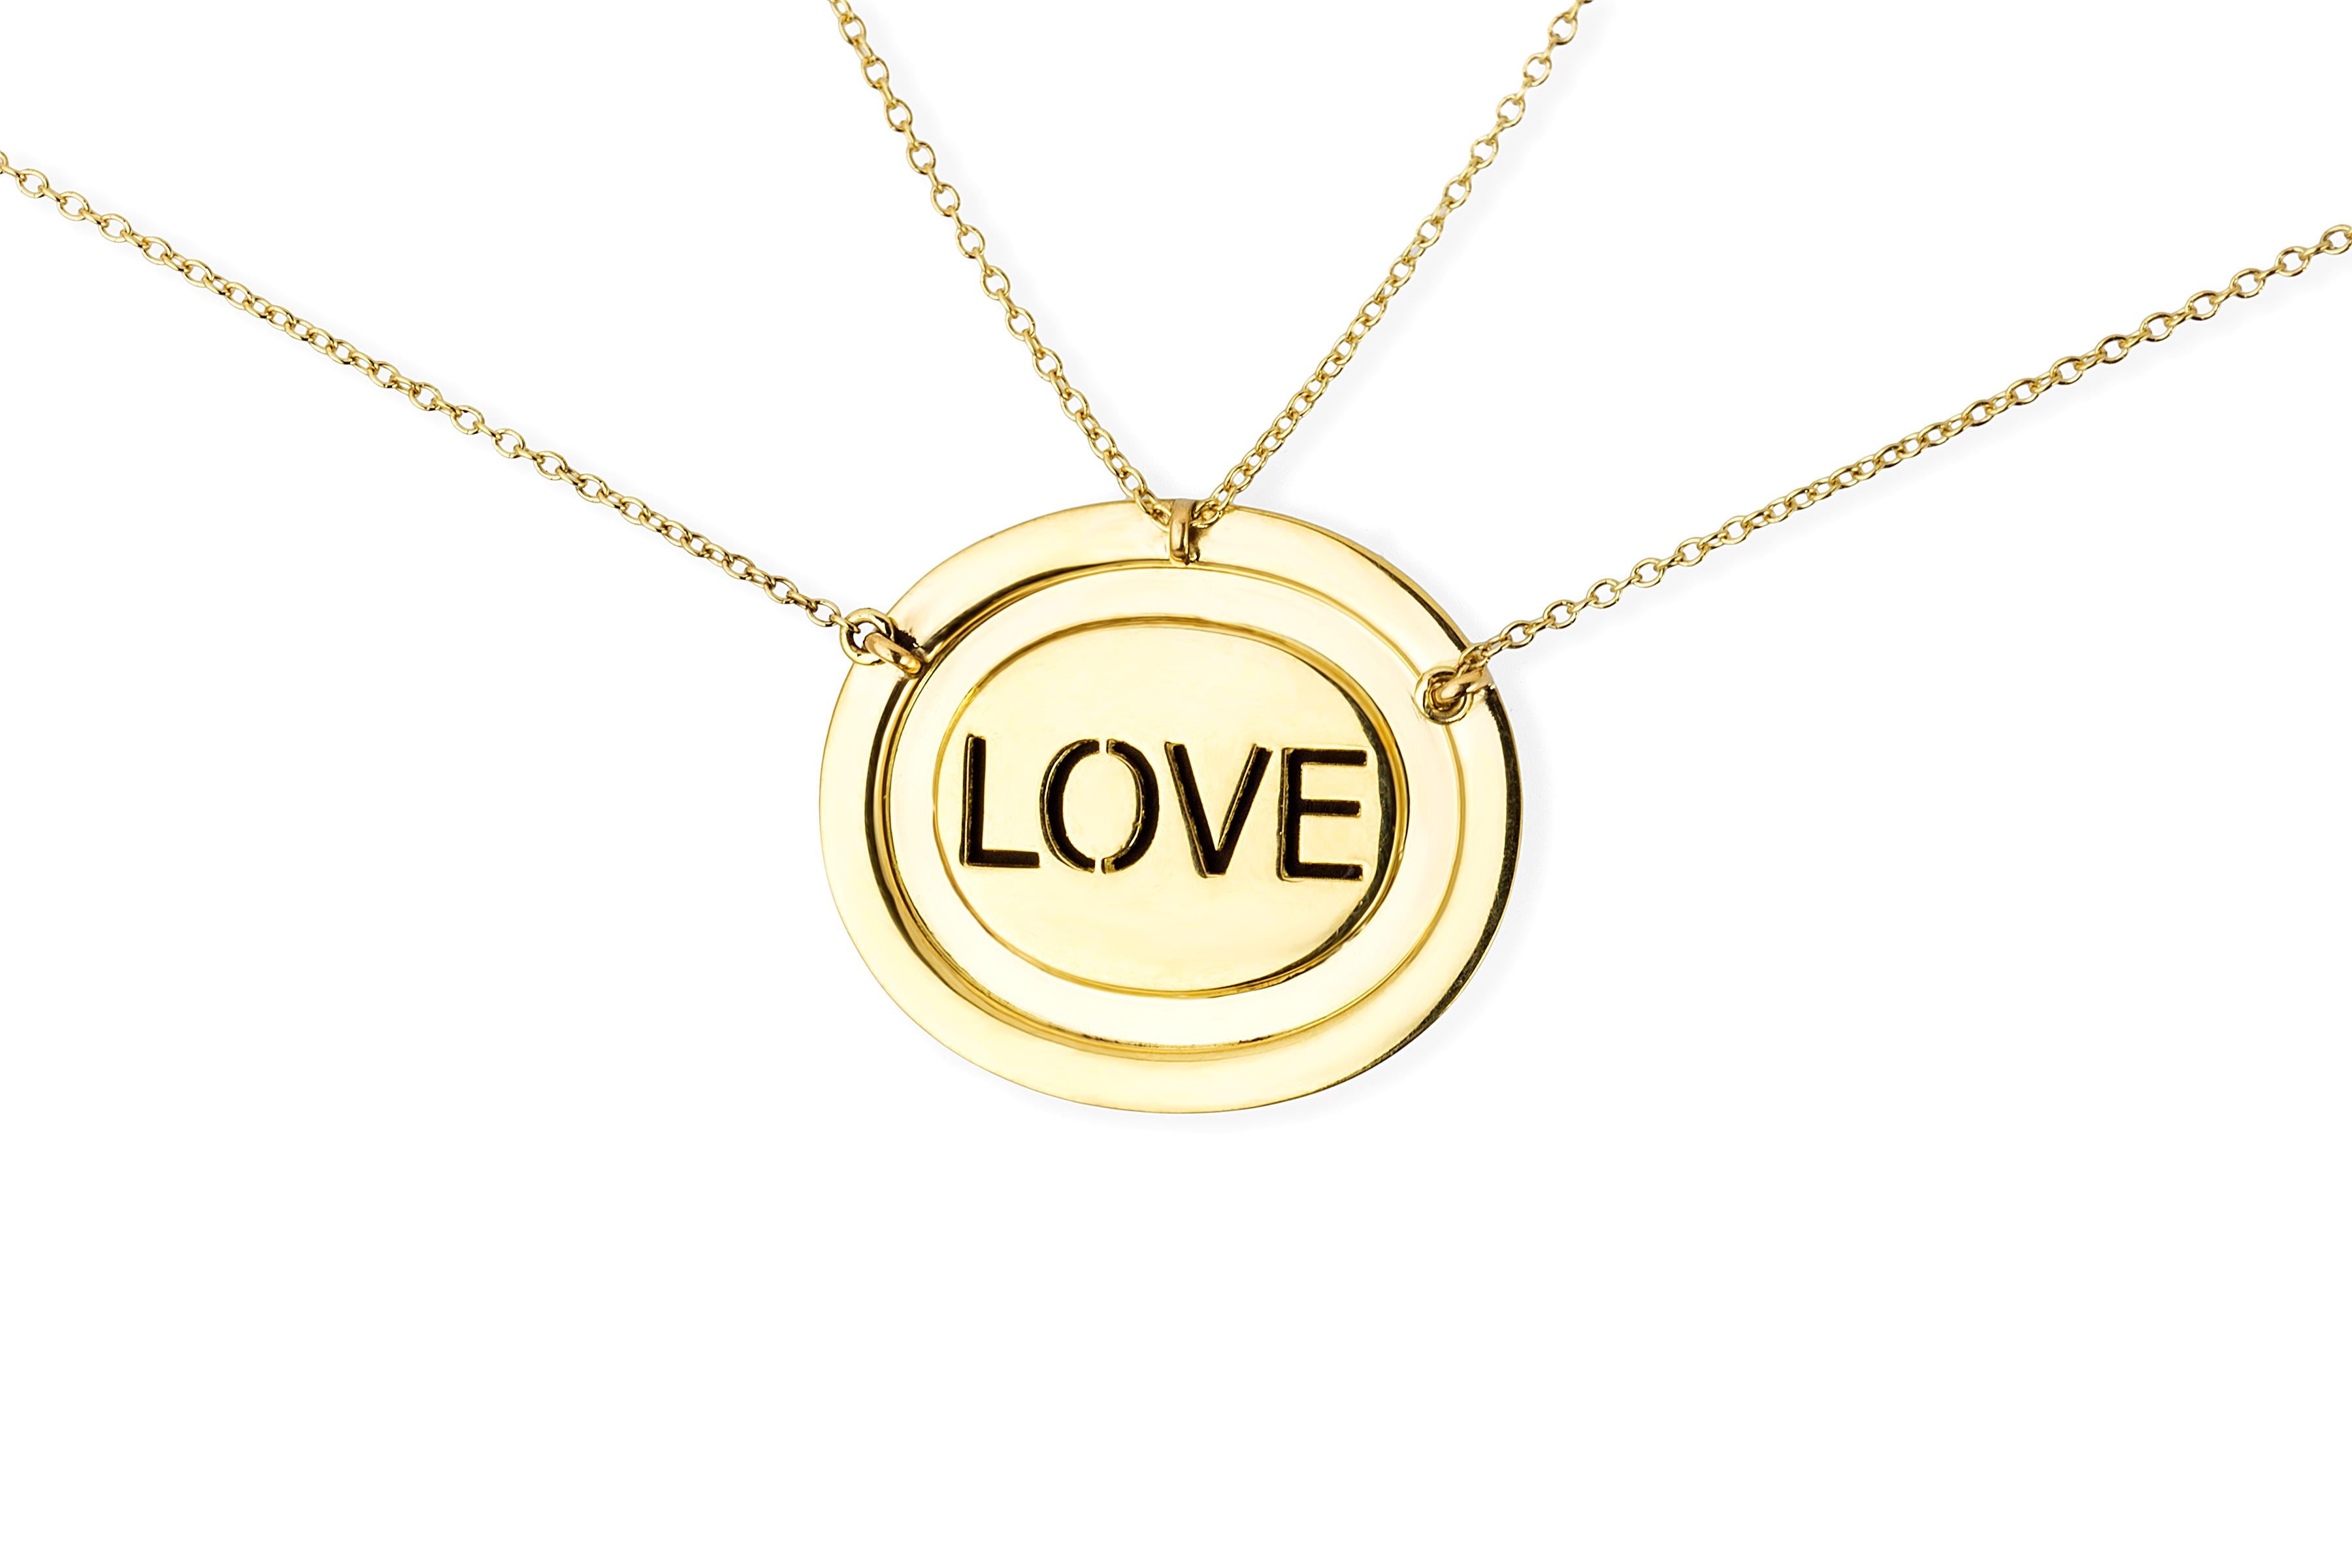 The blue agate cameo is hand created by a master carver bringing out the colors and depth within the layers of the stone. The cameo is encased in yellow gold, inverted diamonds, and sapphires. On each Eye Love Mini Cameo necklace, ‘love’ is found on